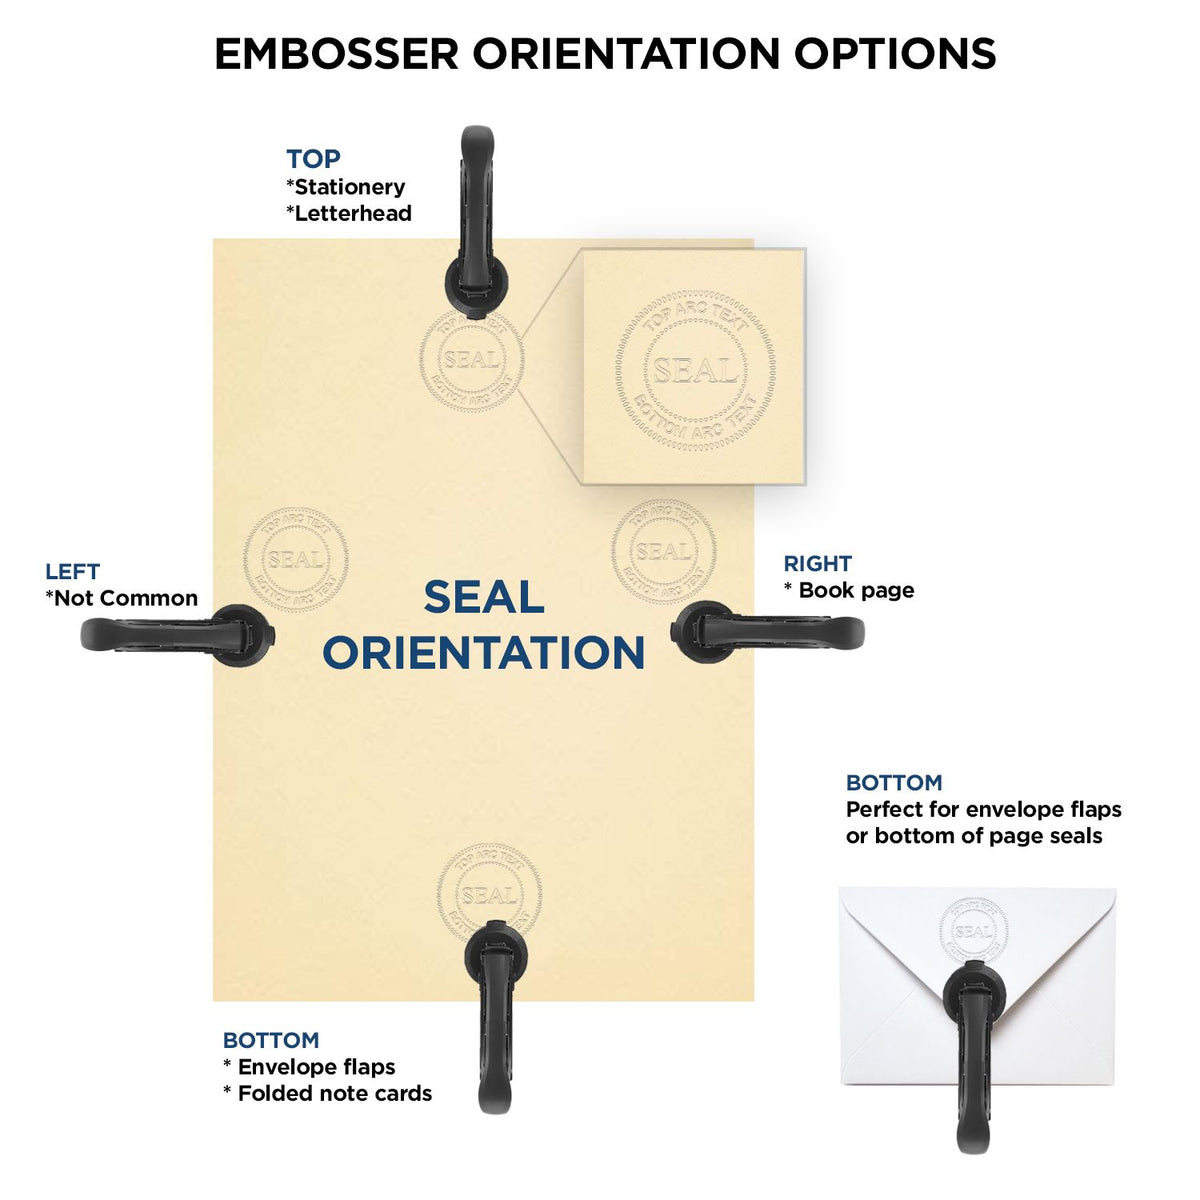 An infographic for the Handheld District of Columbia Professional Engineer Embosser showing embosser orientation, this is showing examples of a top, bottom, right and left insert.